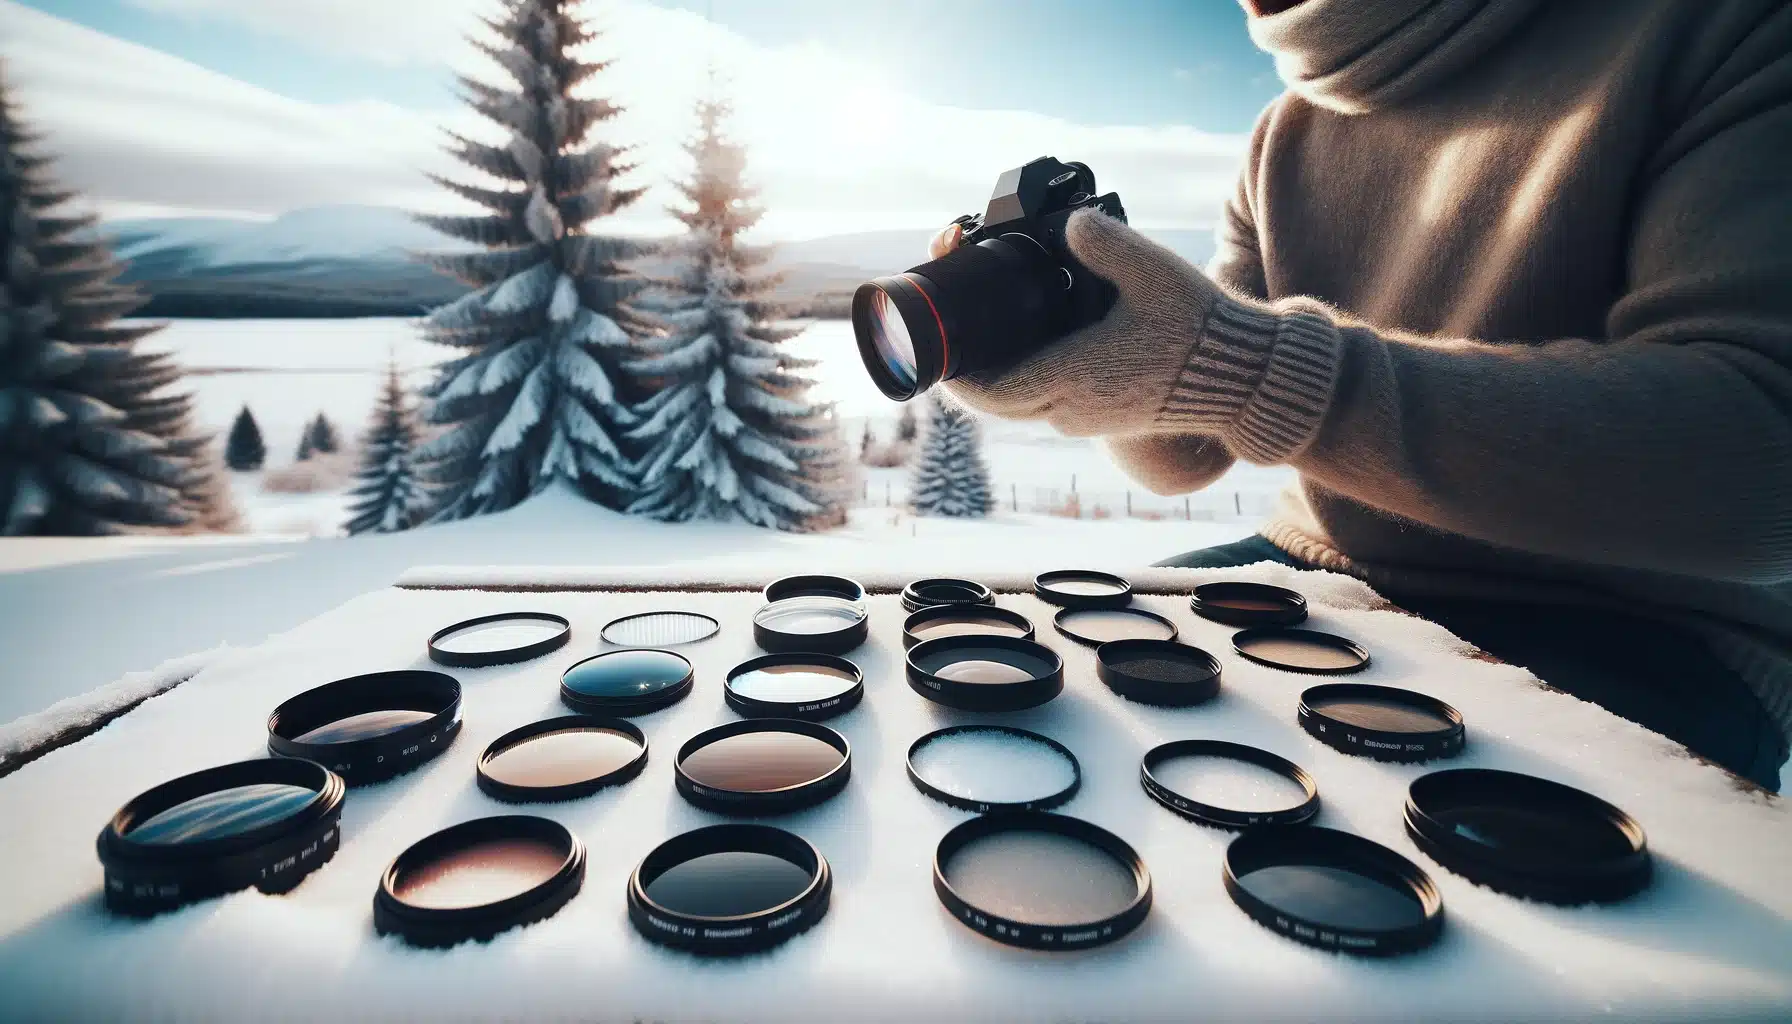 A person adjusting a filter on their camera while various other filters are displayed on a snow-covered table. The scene is set in a snowy landscape with trees and a clear sky in the background.